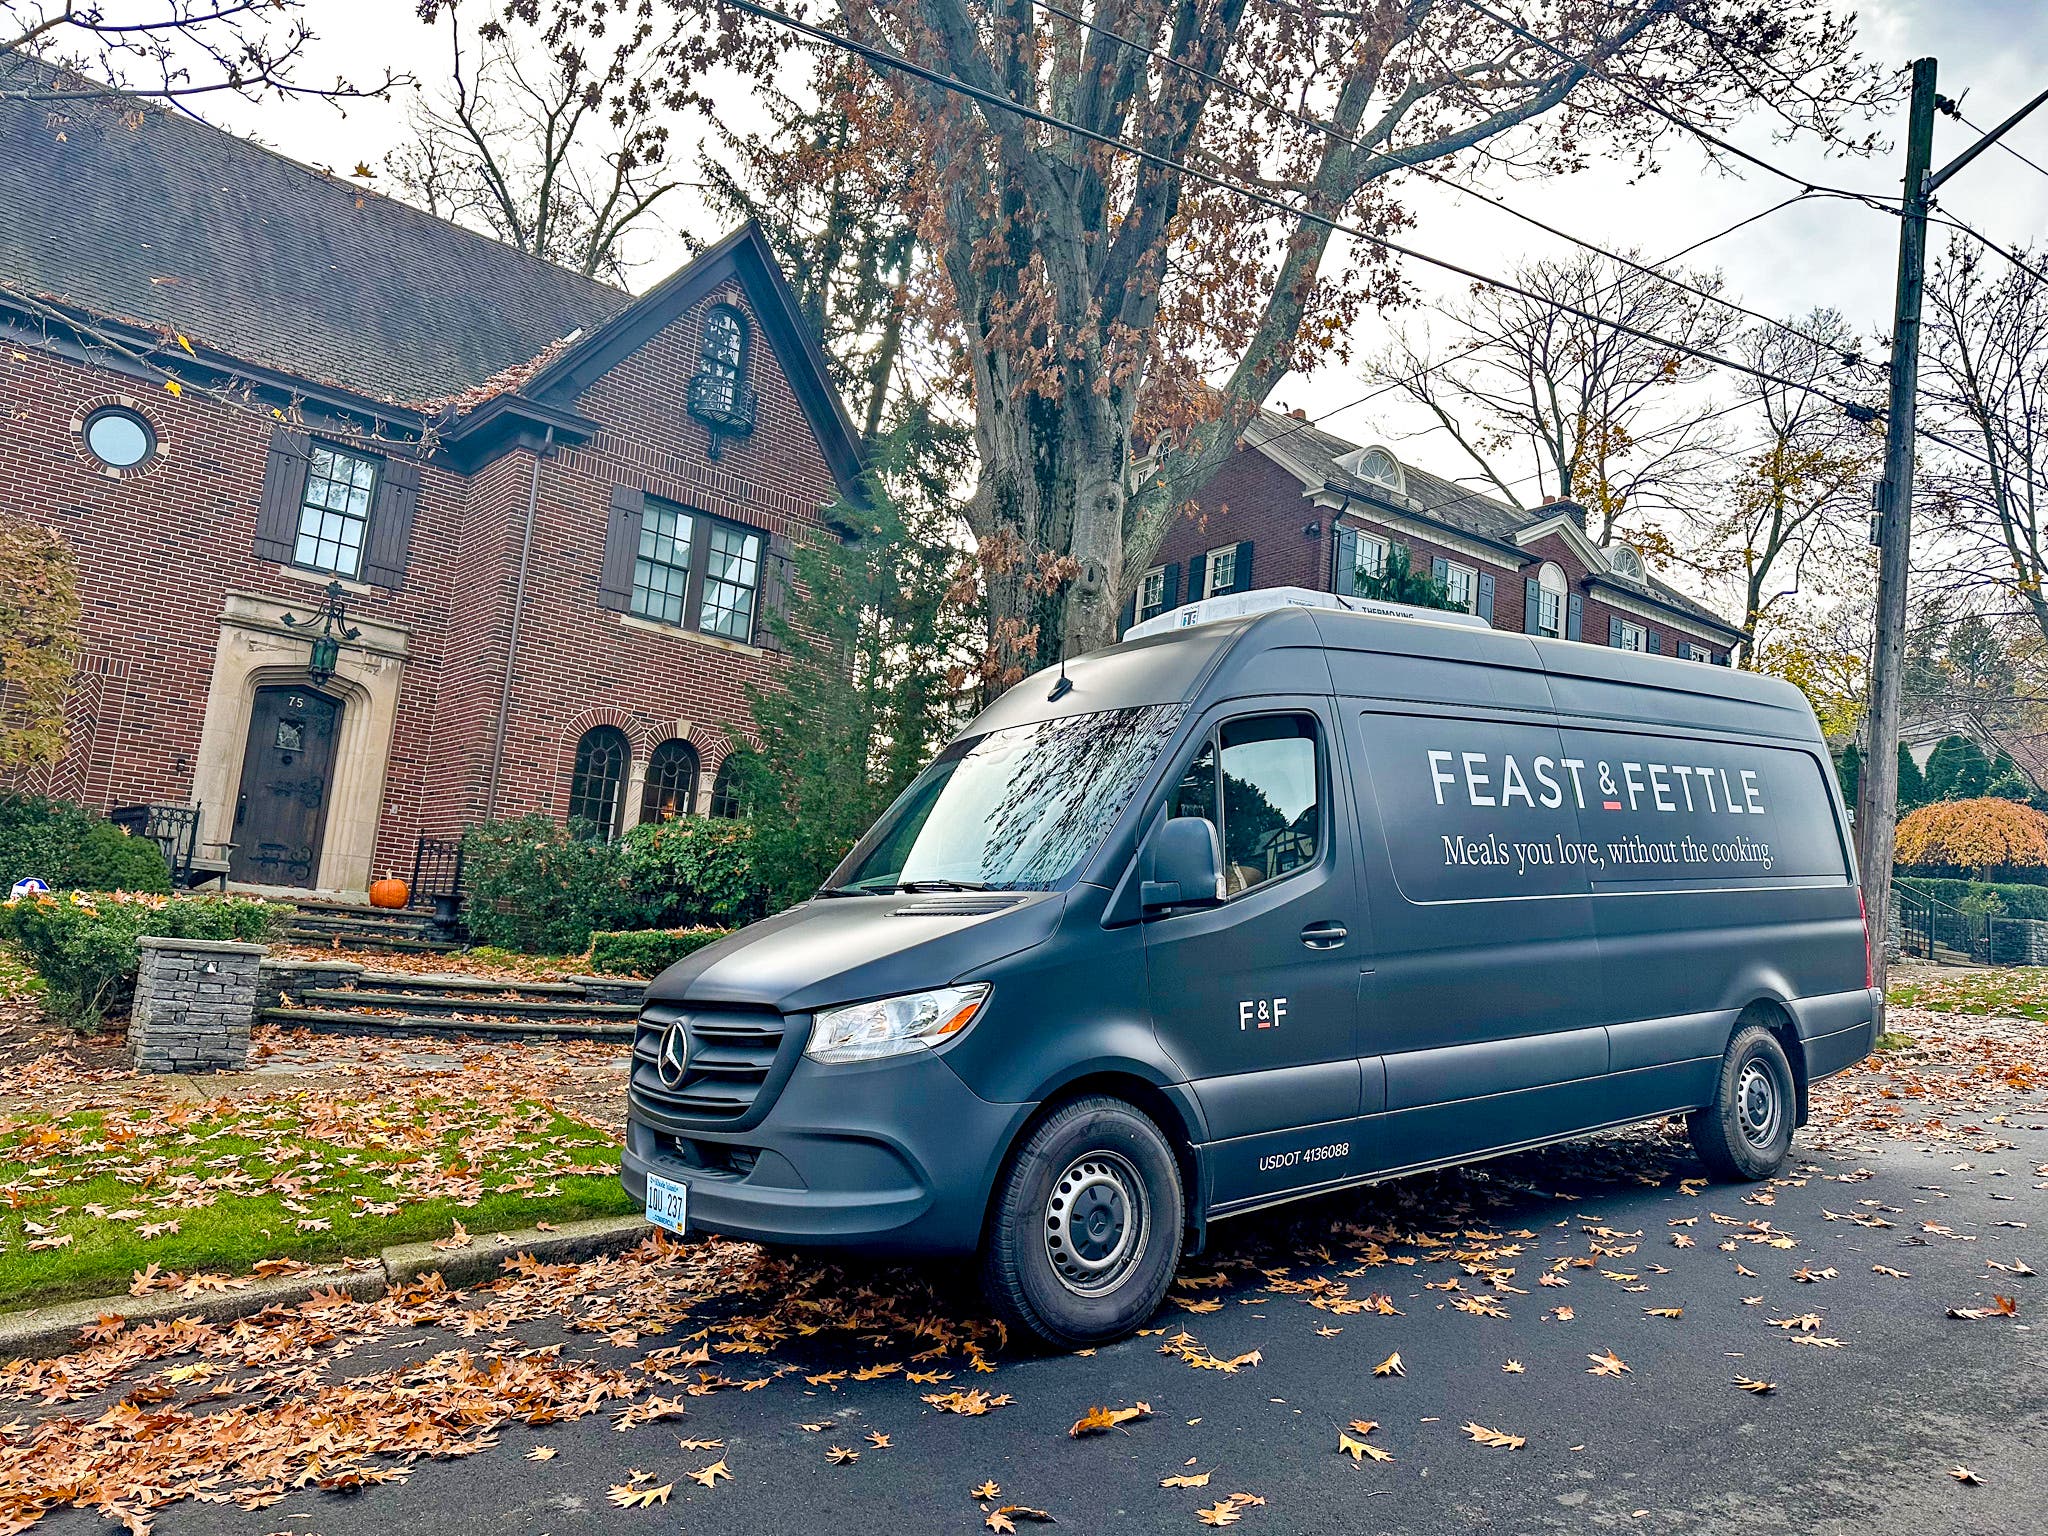 Local Meal Service Feast & Fettle Delivers to Westport